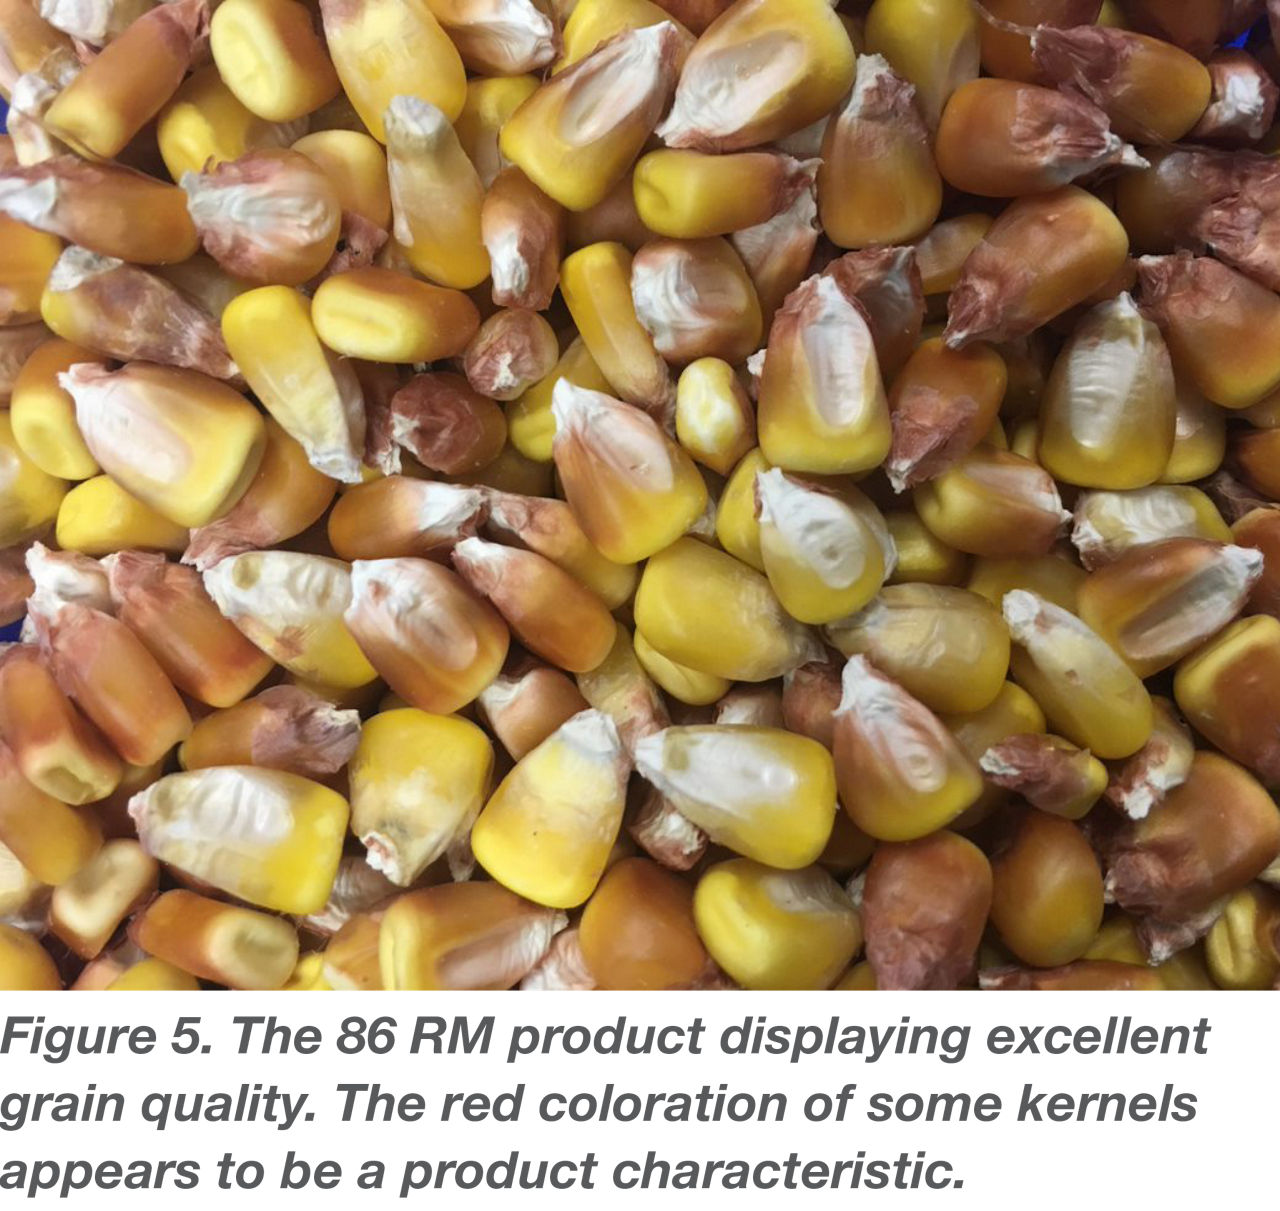 The 86RM product displaying excellent grain quality.